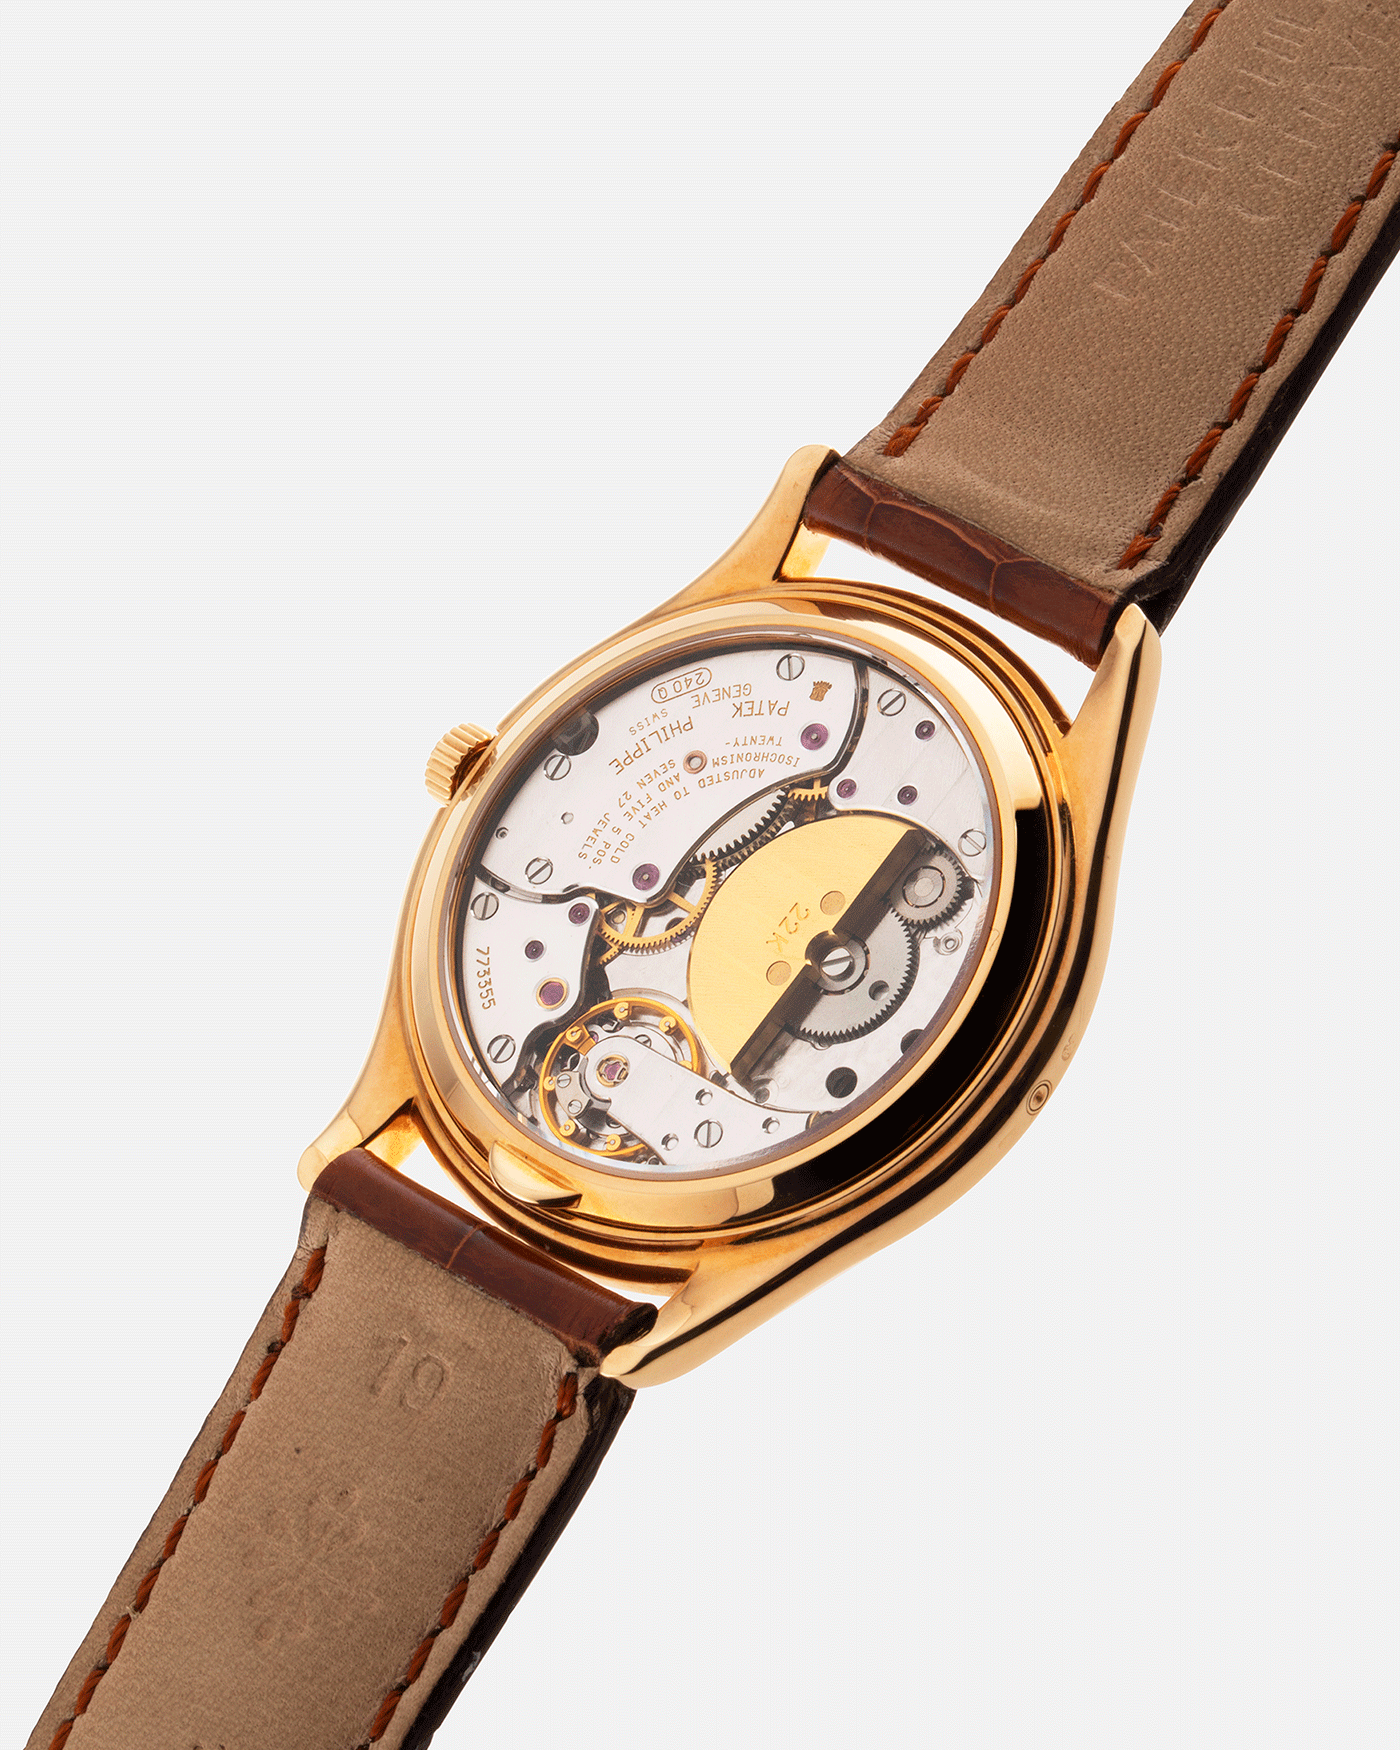 Brand: Patek Philippe Year: 1990’s Model: Perpetual Calendar Reference Number: 3940J Material: 18k Yellow Gold Movement: Cal 240Q Case Diameter: 36mm Bracelet: A Collected Man Chestnut Brown Textured Calf Strap and Patek Philippe Chestnut Brown Alligator Strap with 18k Yellow Gold Patek Philippe Tang Buckle